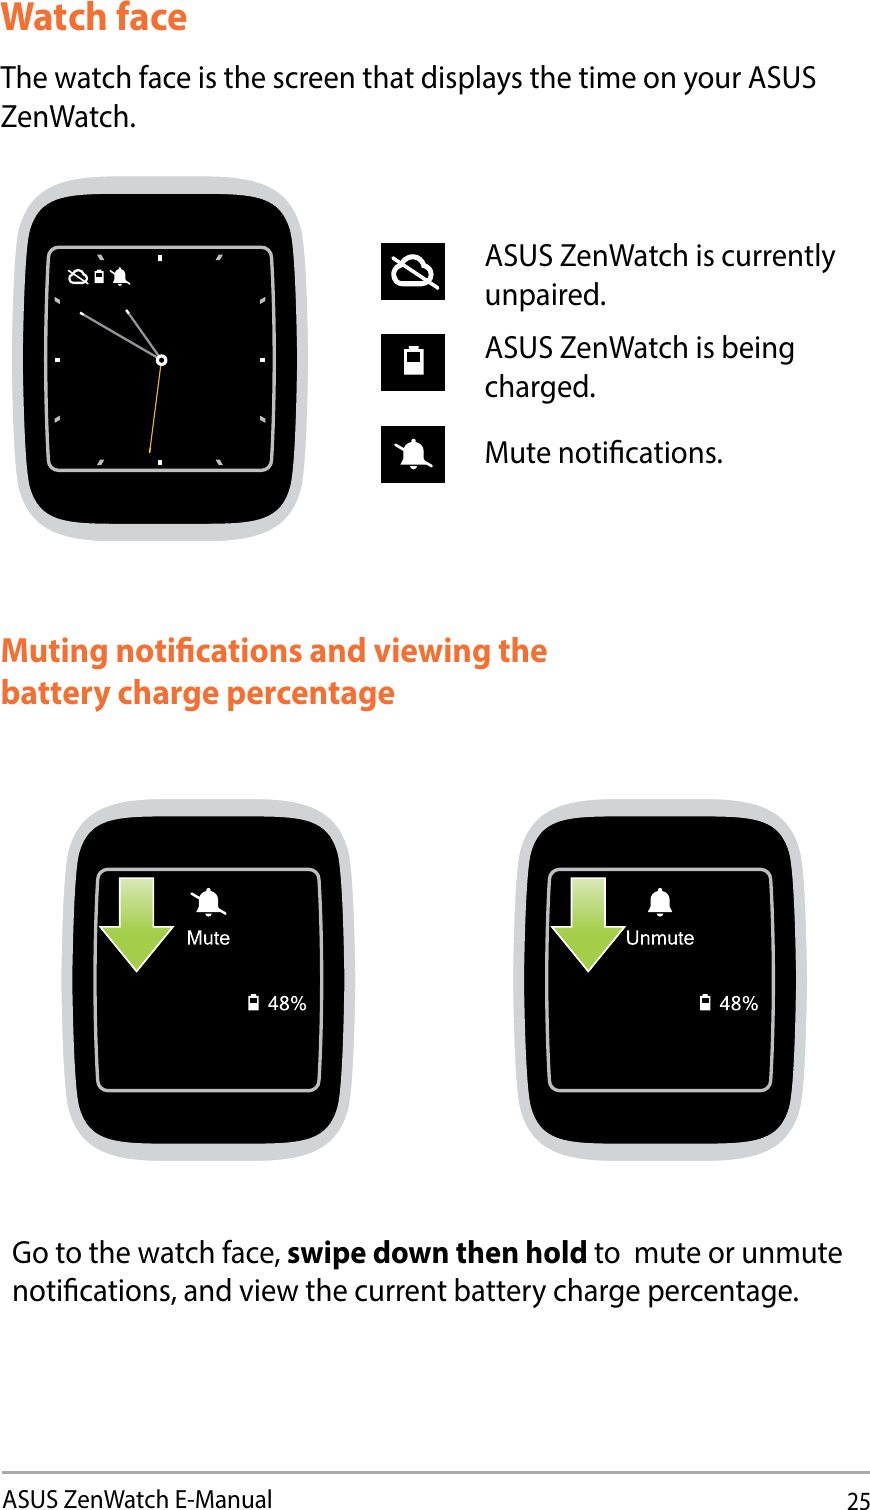 25ASUS ZenWatch E-ManualWatch faceThe watch face is the screen that displays the time on your ASUS ZenWatch.ASUS ZenWatch is currently unpaired.ASUS ZenWatch is being charged.Mute notications.Muting notications and viewing the battery charge percentageGo to the watch face, swipe down then hold to  mute or unmute notications, and view the current battery charge percentage.